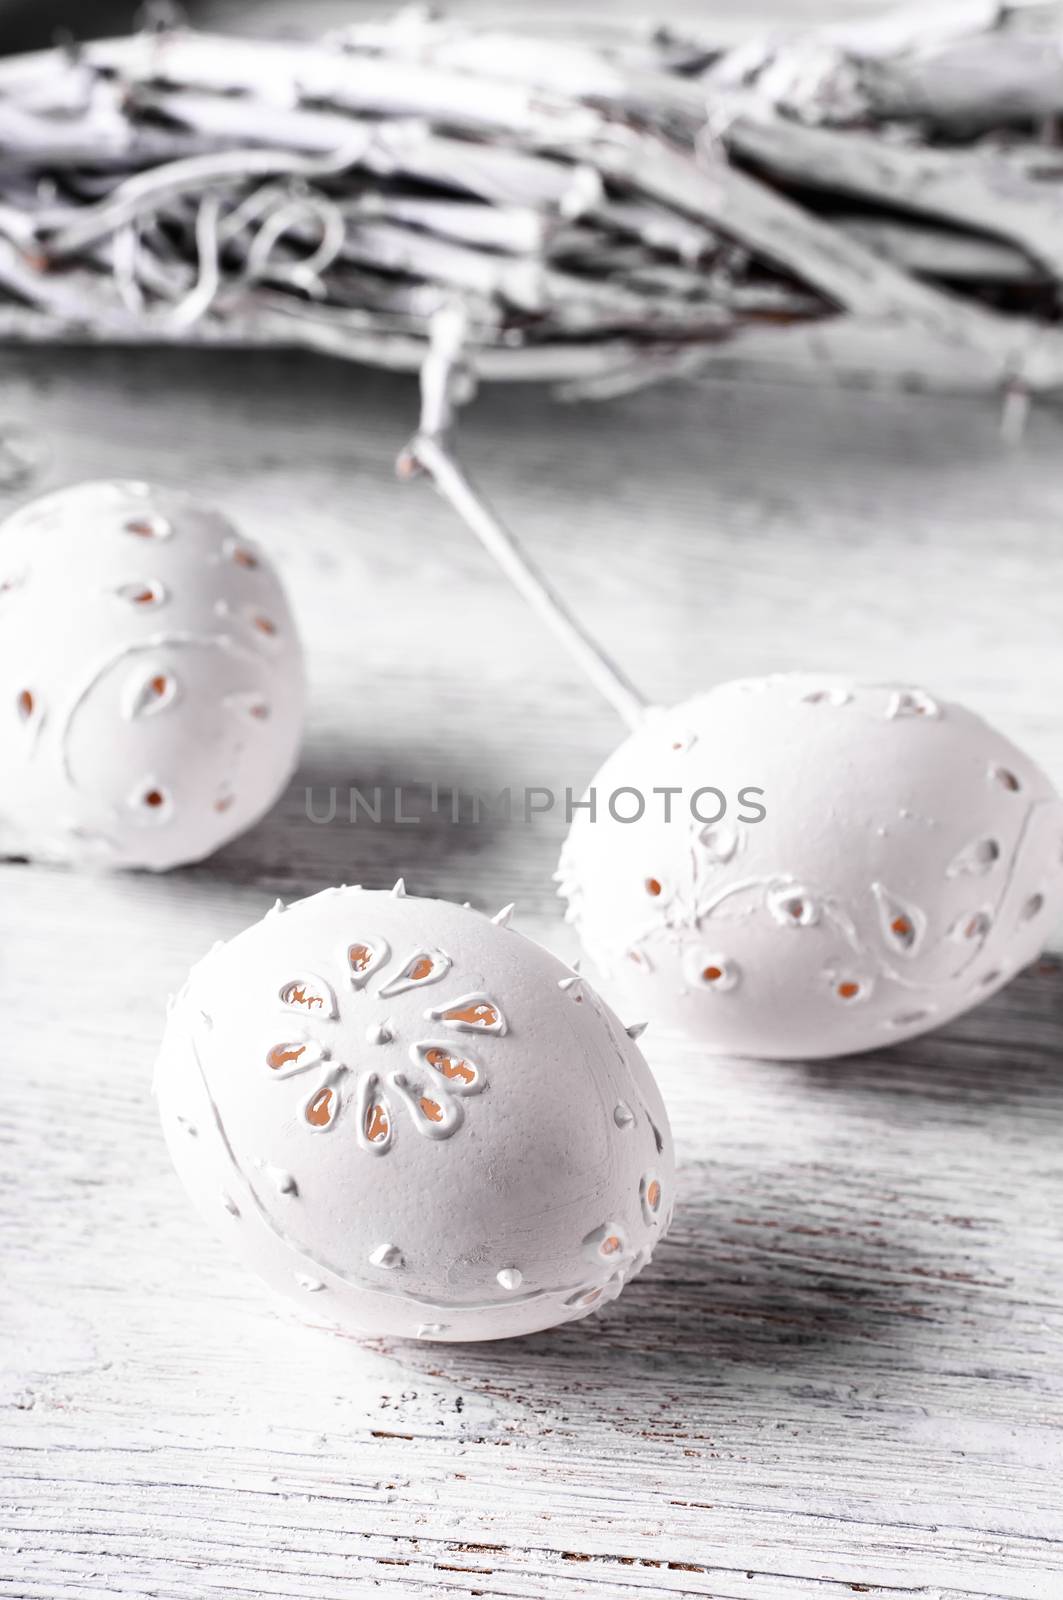 Easter eggs with cut out pattern by hand on light background.The photograph high key.